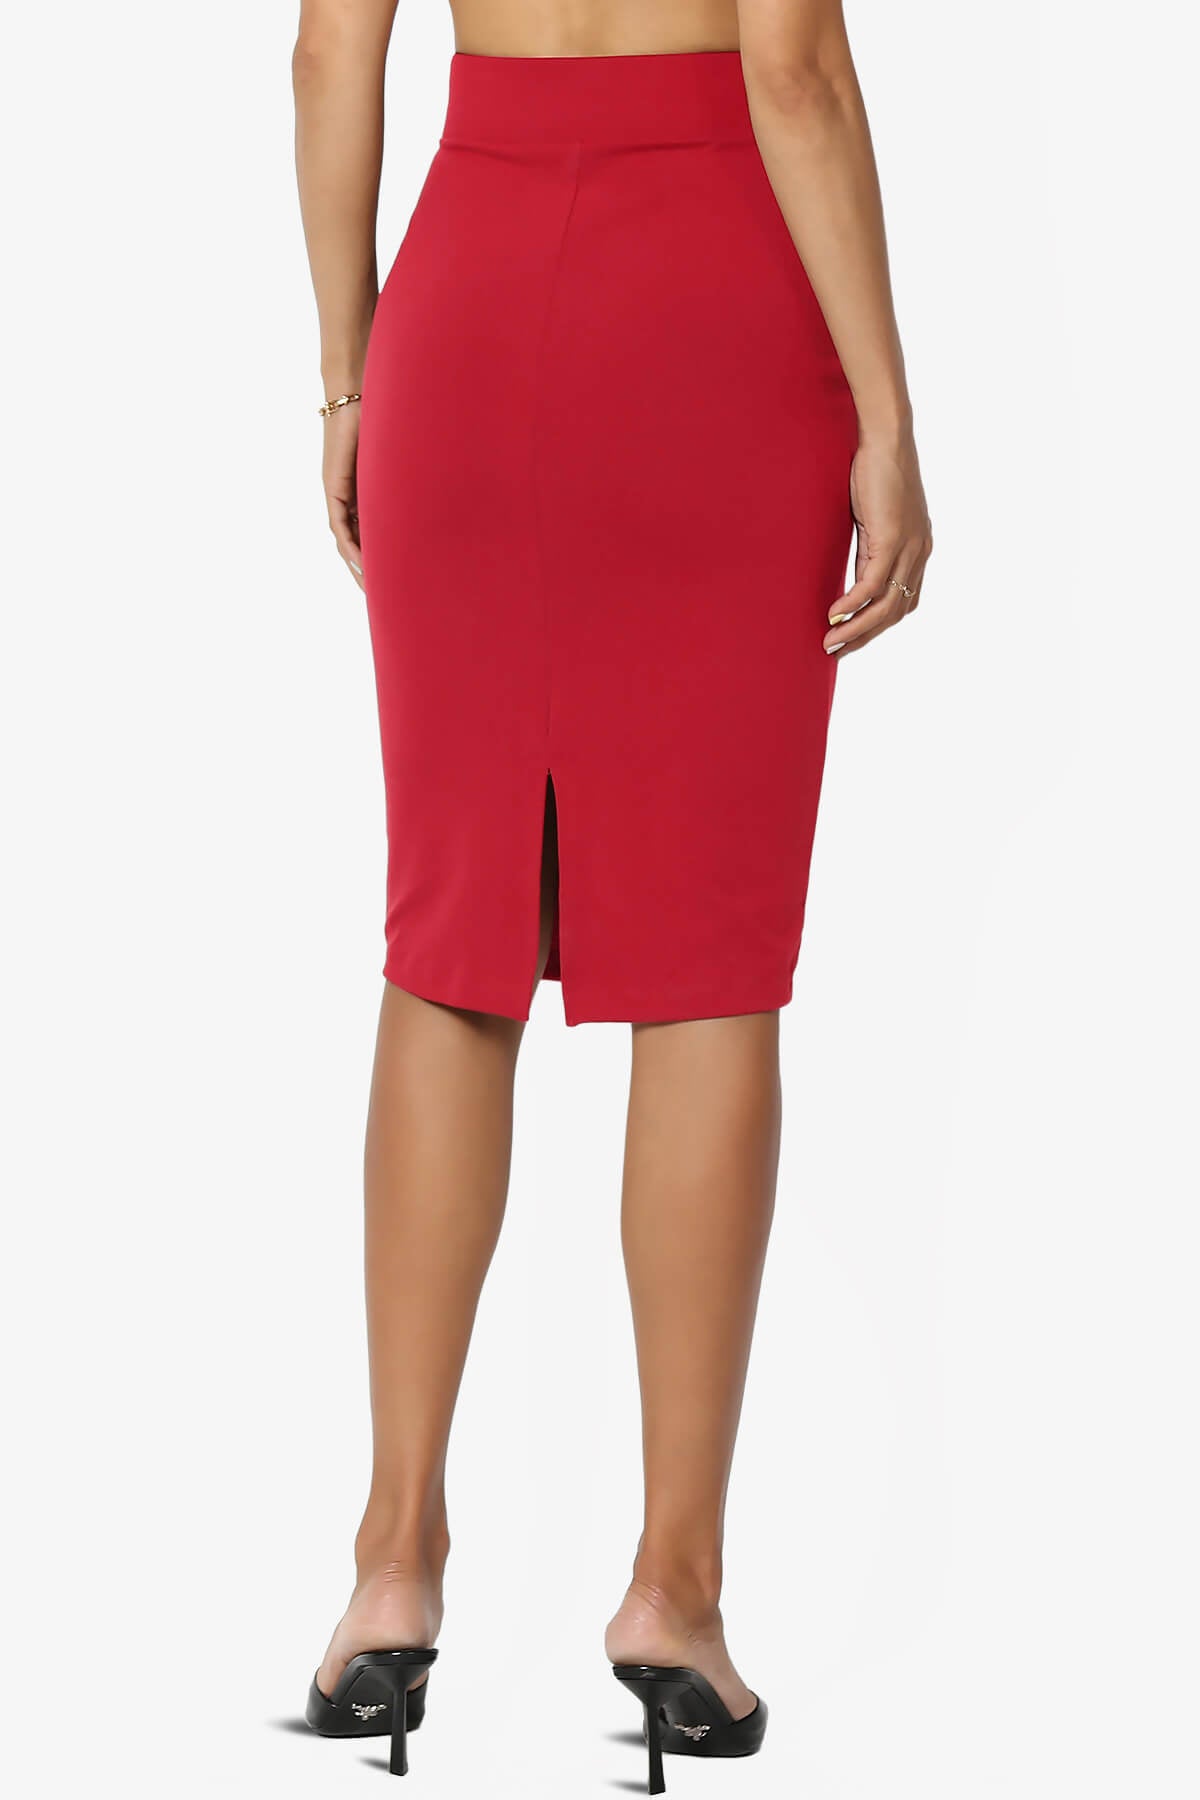 Hayle Soft Knit High Rise Midi Pencil Skirt RED_2